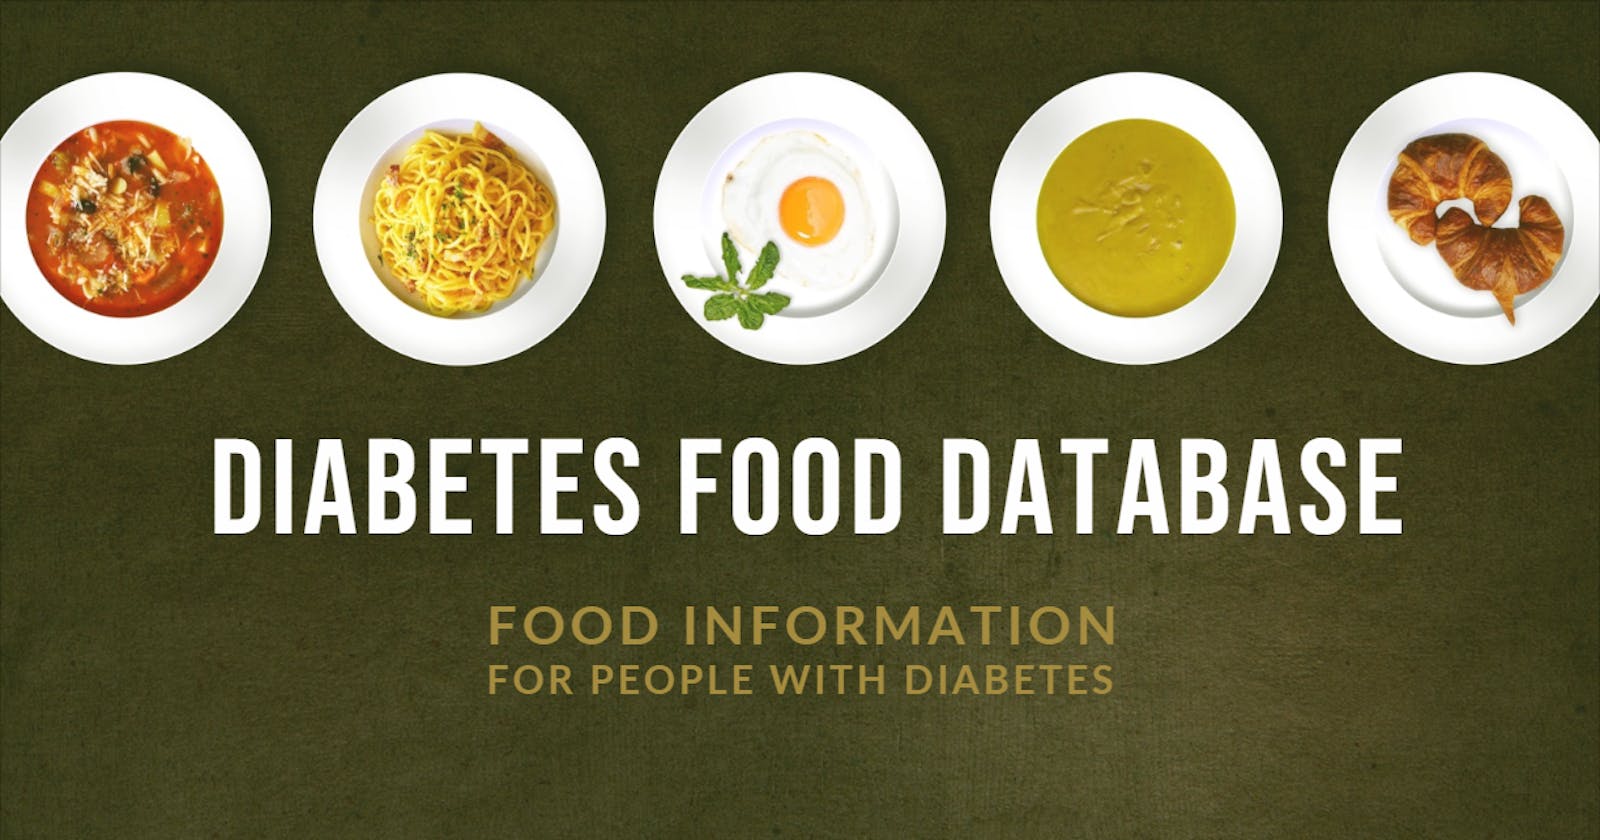 Introducing the Diabetes Food Database